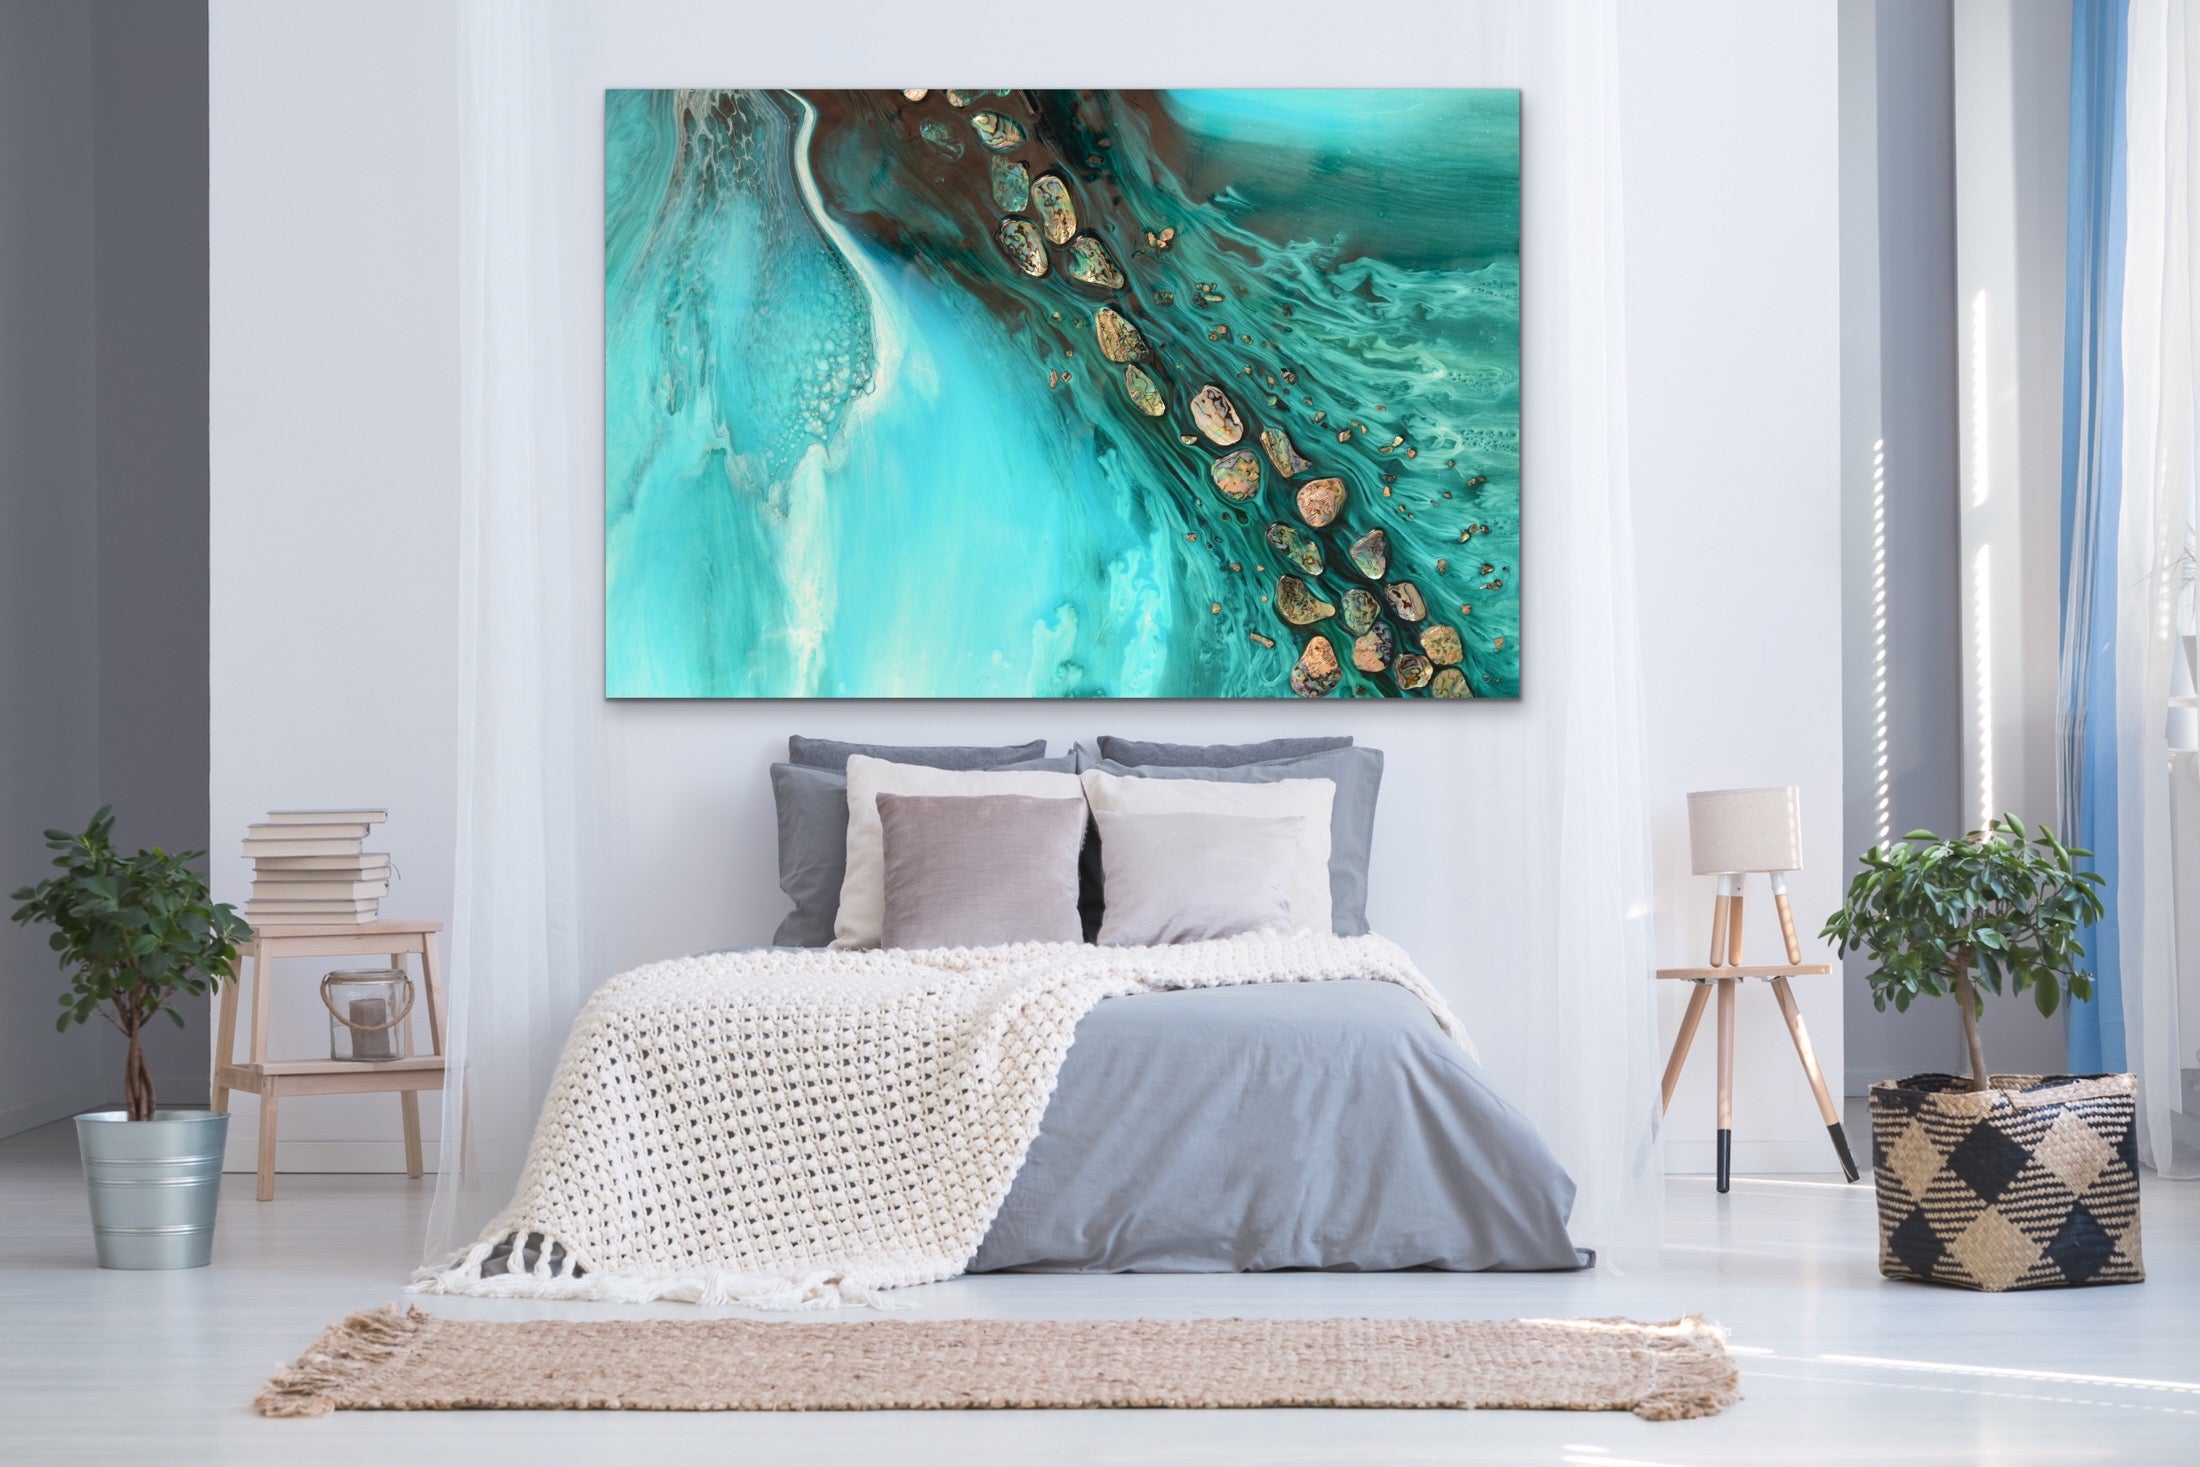 Abstract Ocean. Teal & Aqua. Rise Above Tide 3. Art Print. Antuanelle 4 Artwork. Limited Edition Print